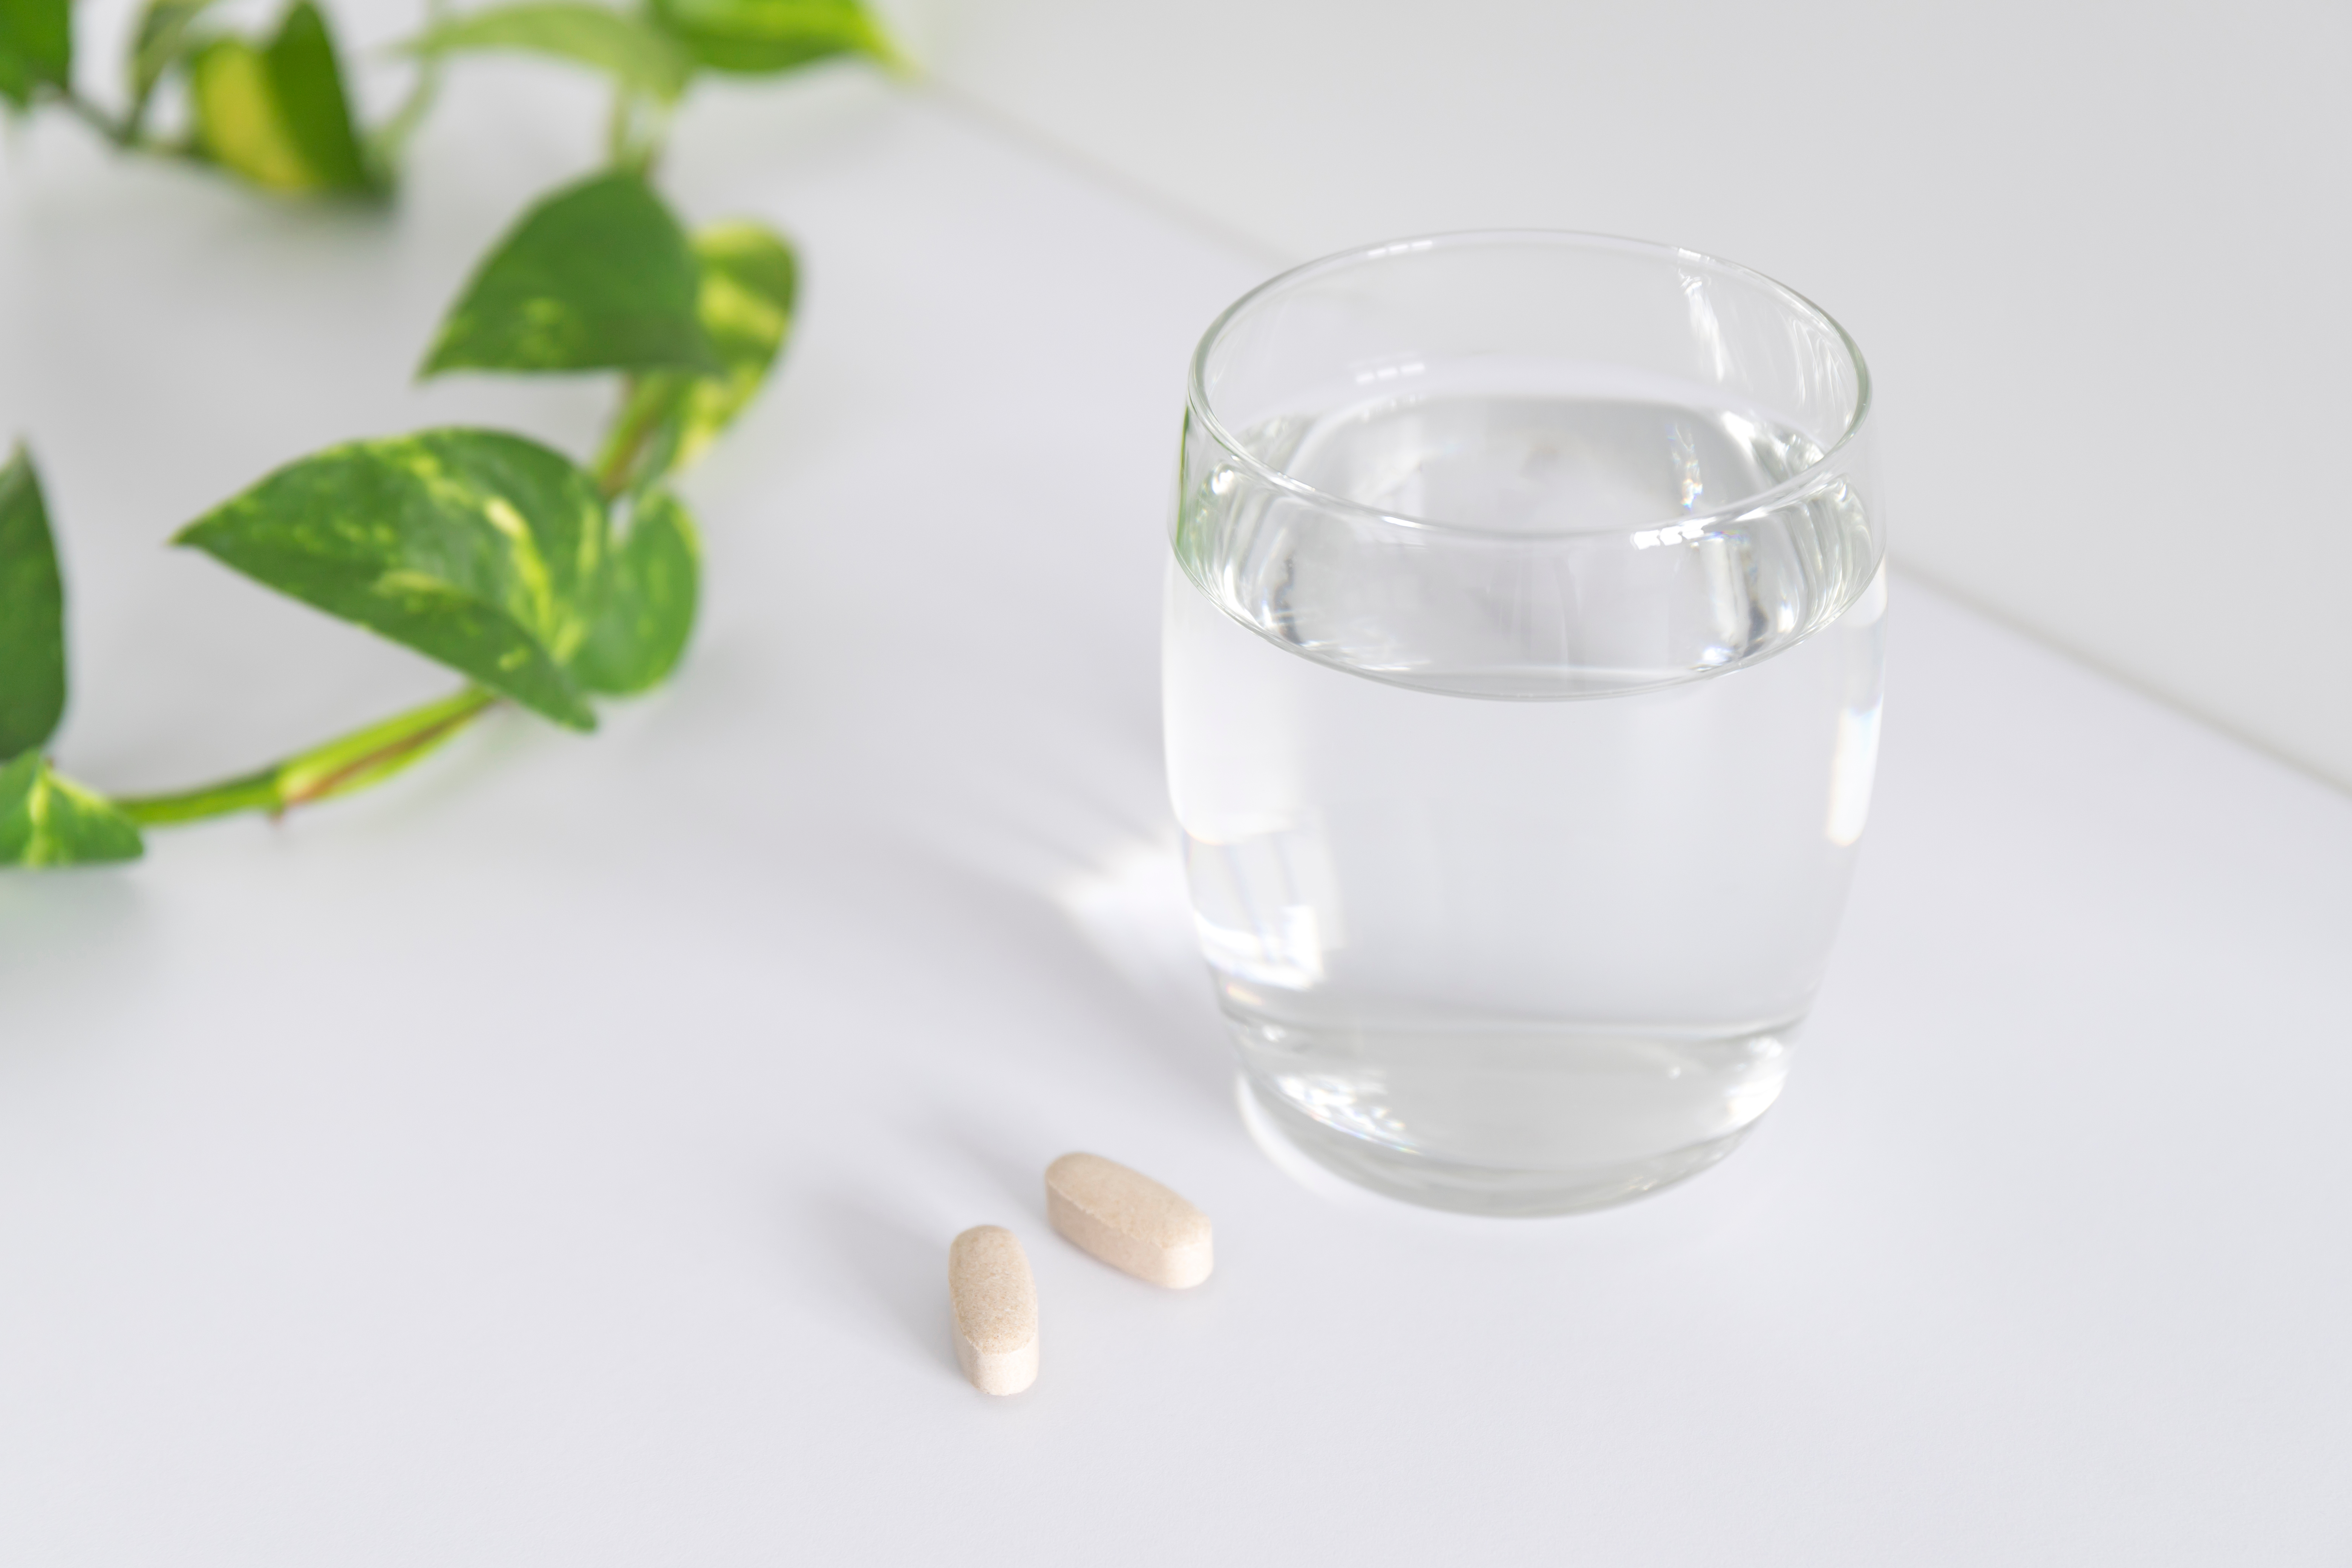 Pills and glass of water. | Source: Shutterstock